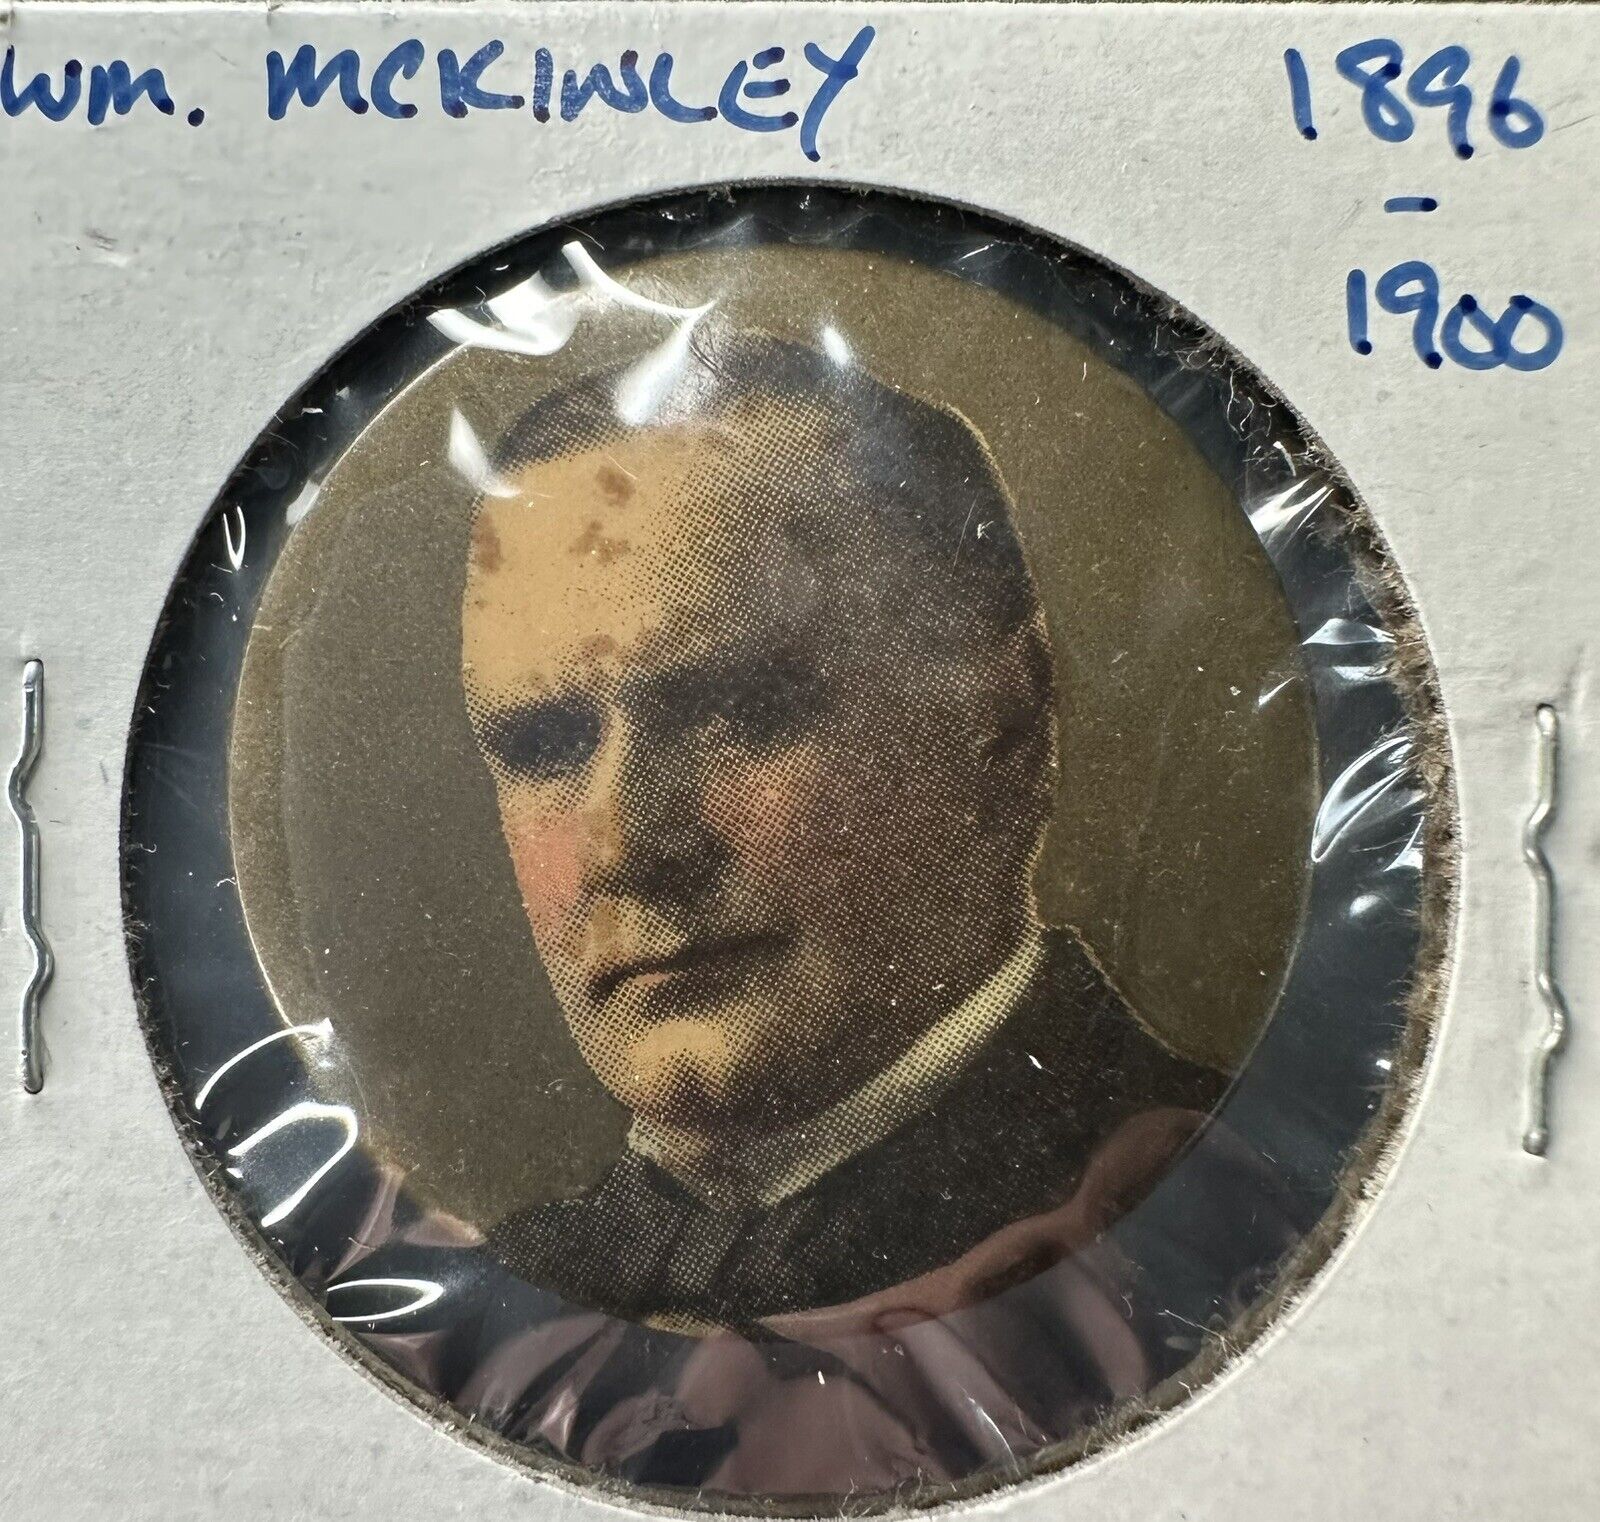 1900 WILLIAM MCKINLEY Political Campaign President Election Button Badge Pin